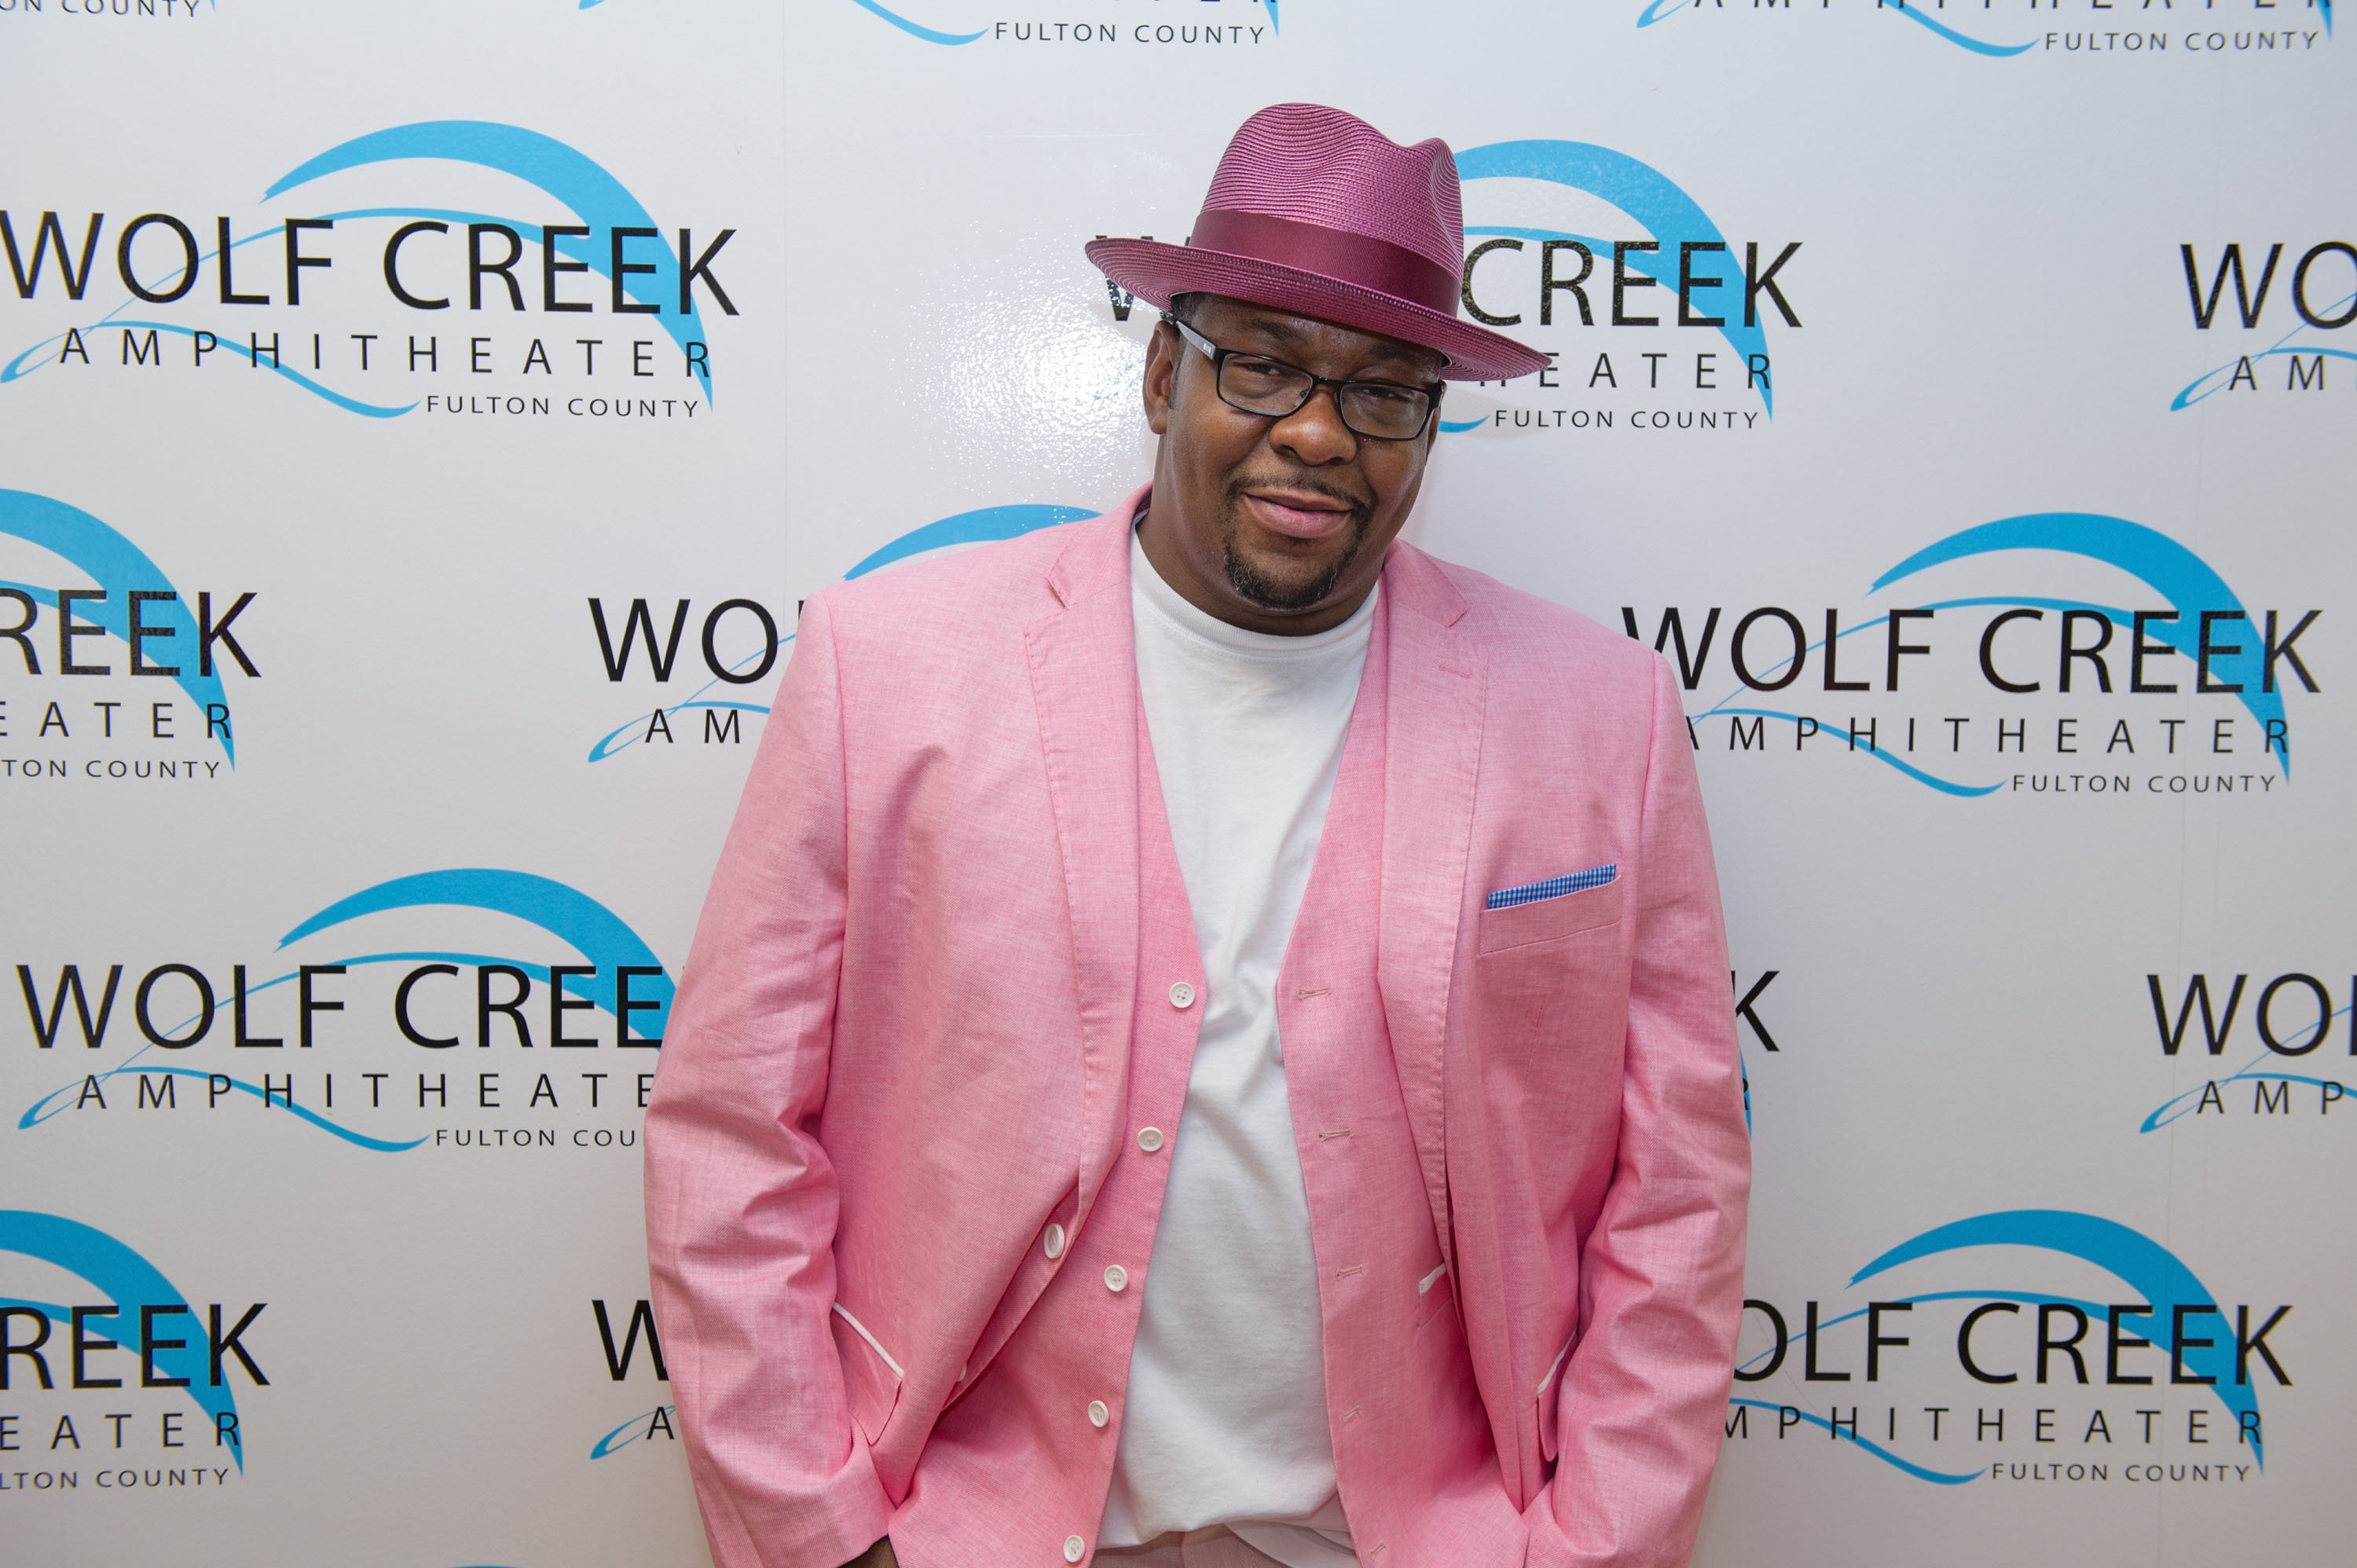 Bobby Brown at the Affordable Old School Concert Series on July 4, 2015 in Georgia | Photos: Getty Images